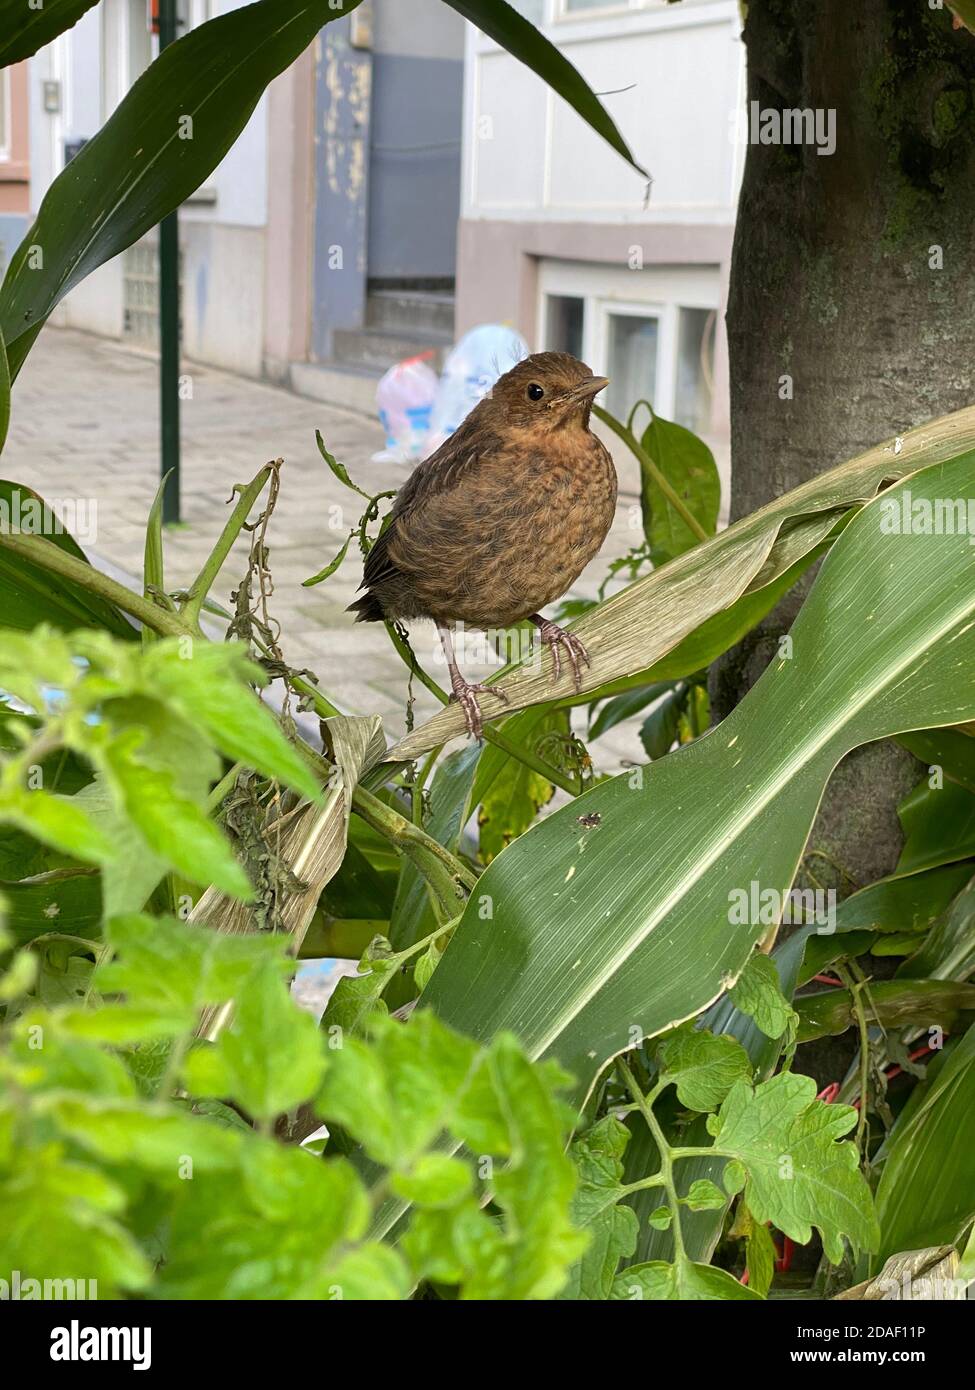 Young black bird in the town Stock Photo